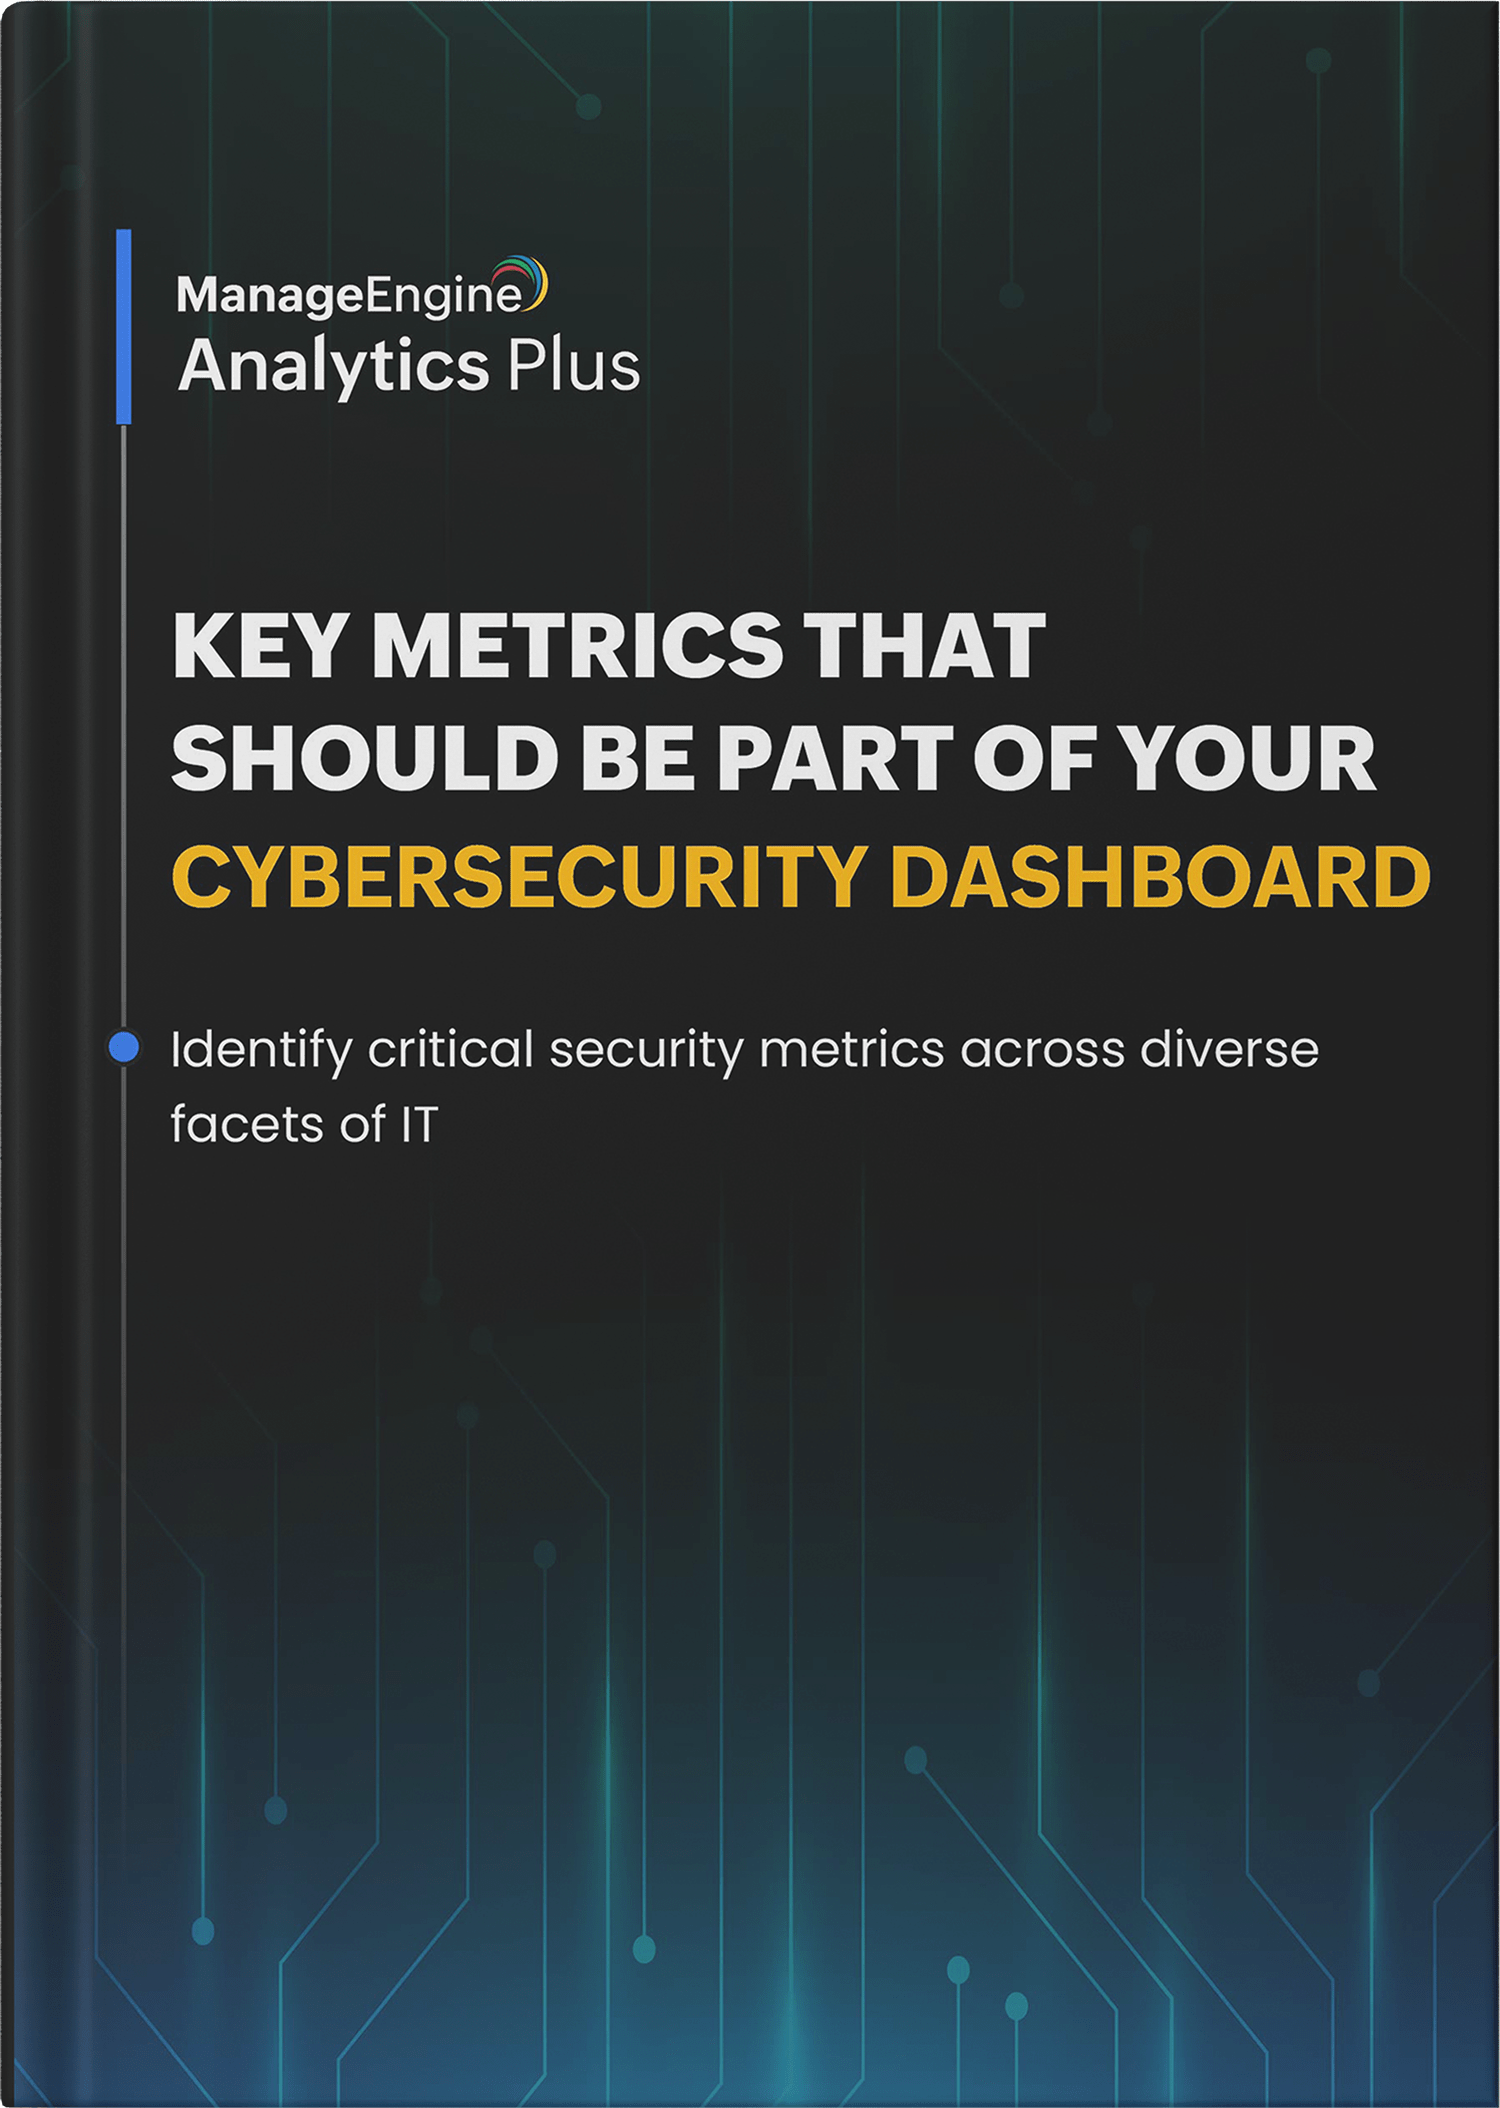 Key metrics that should be part of your cybersecurity dashboard